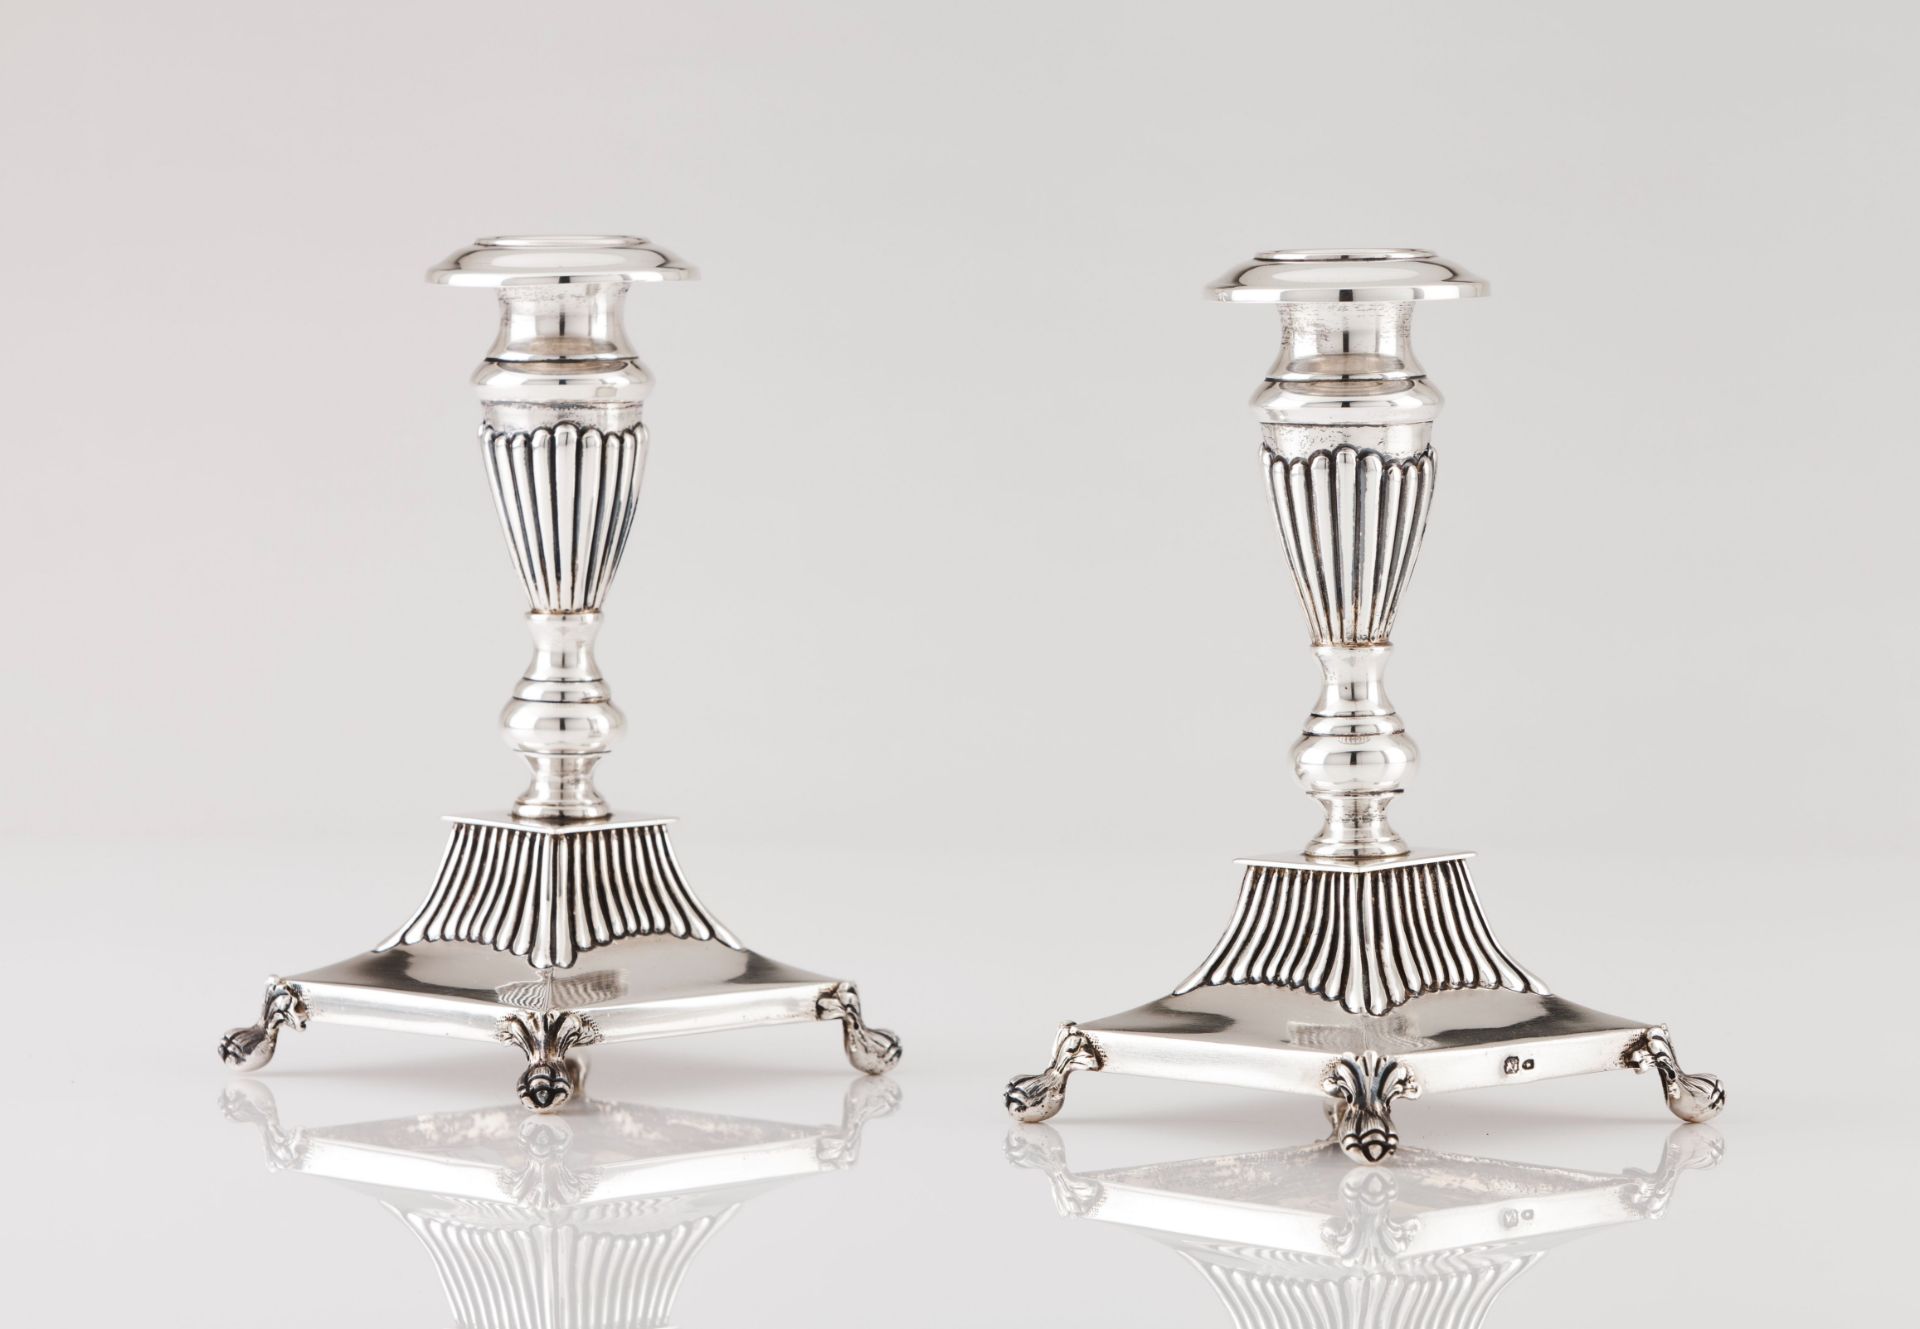 A pair of small sized candlesticks